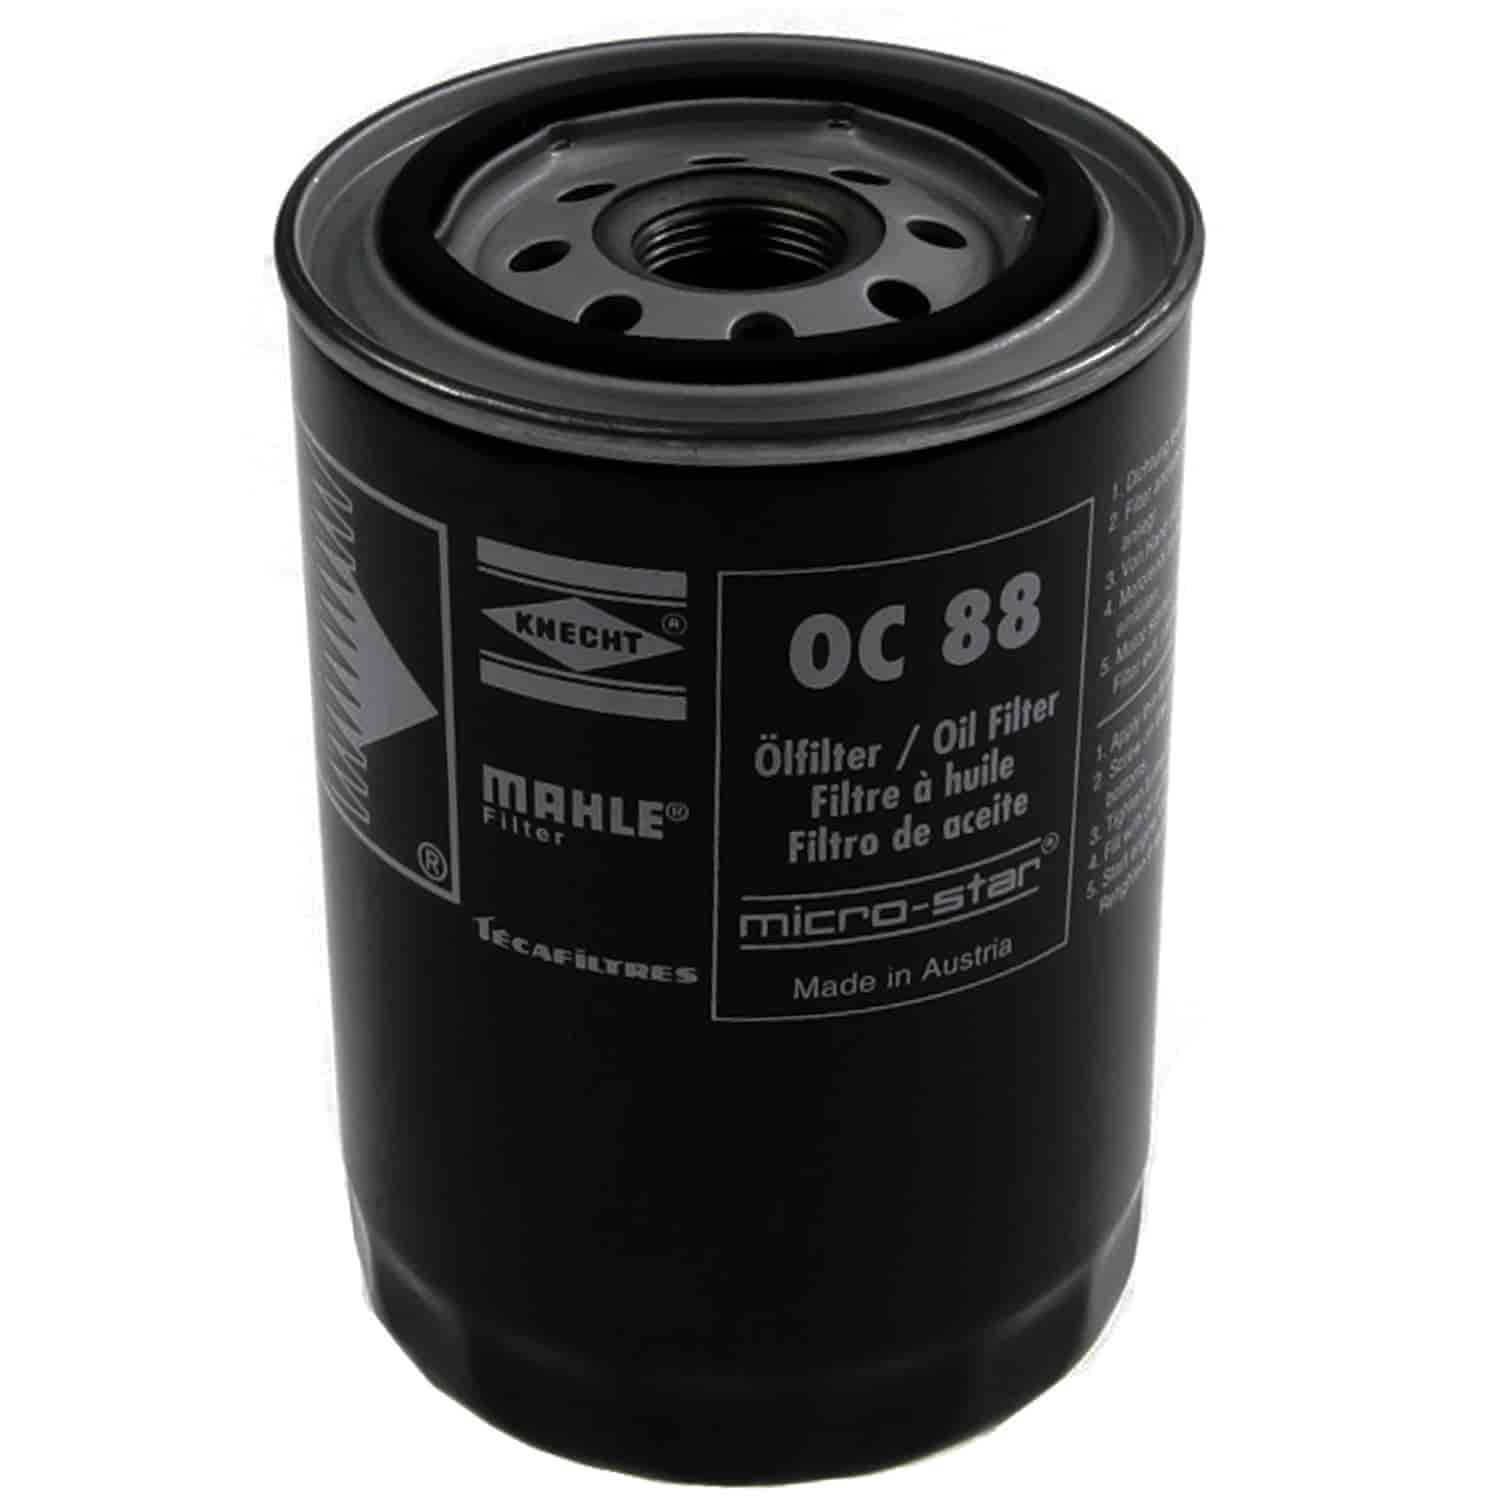 Mahle Oil Filter Various Heavy Duty Applications